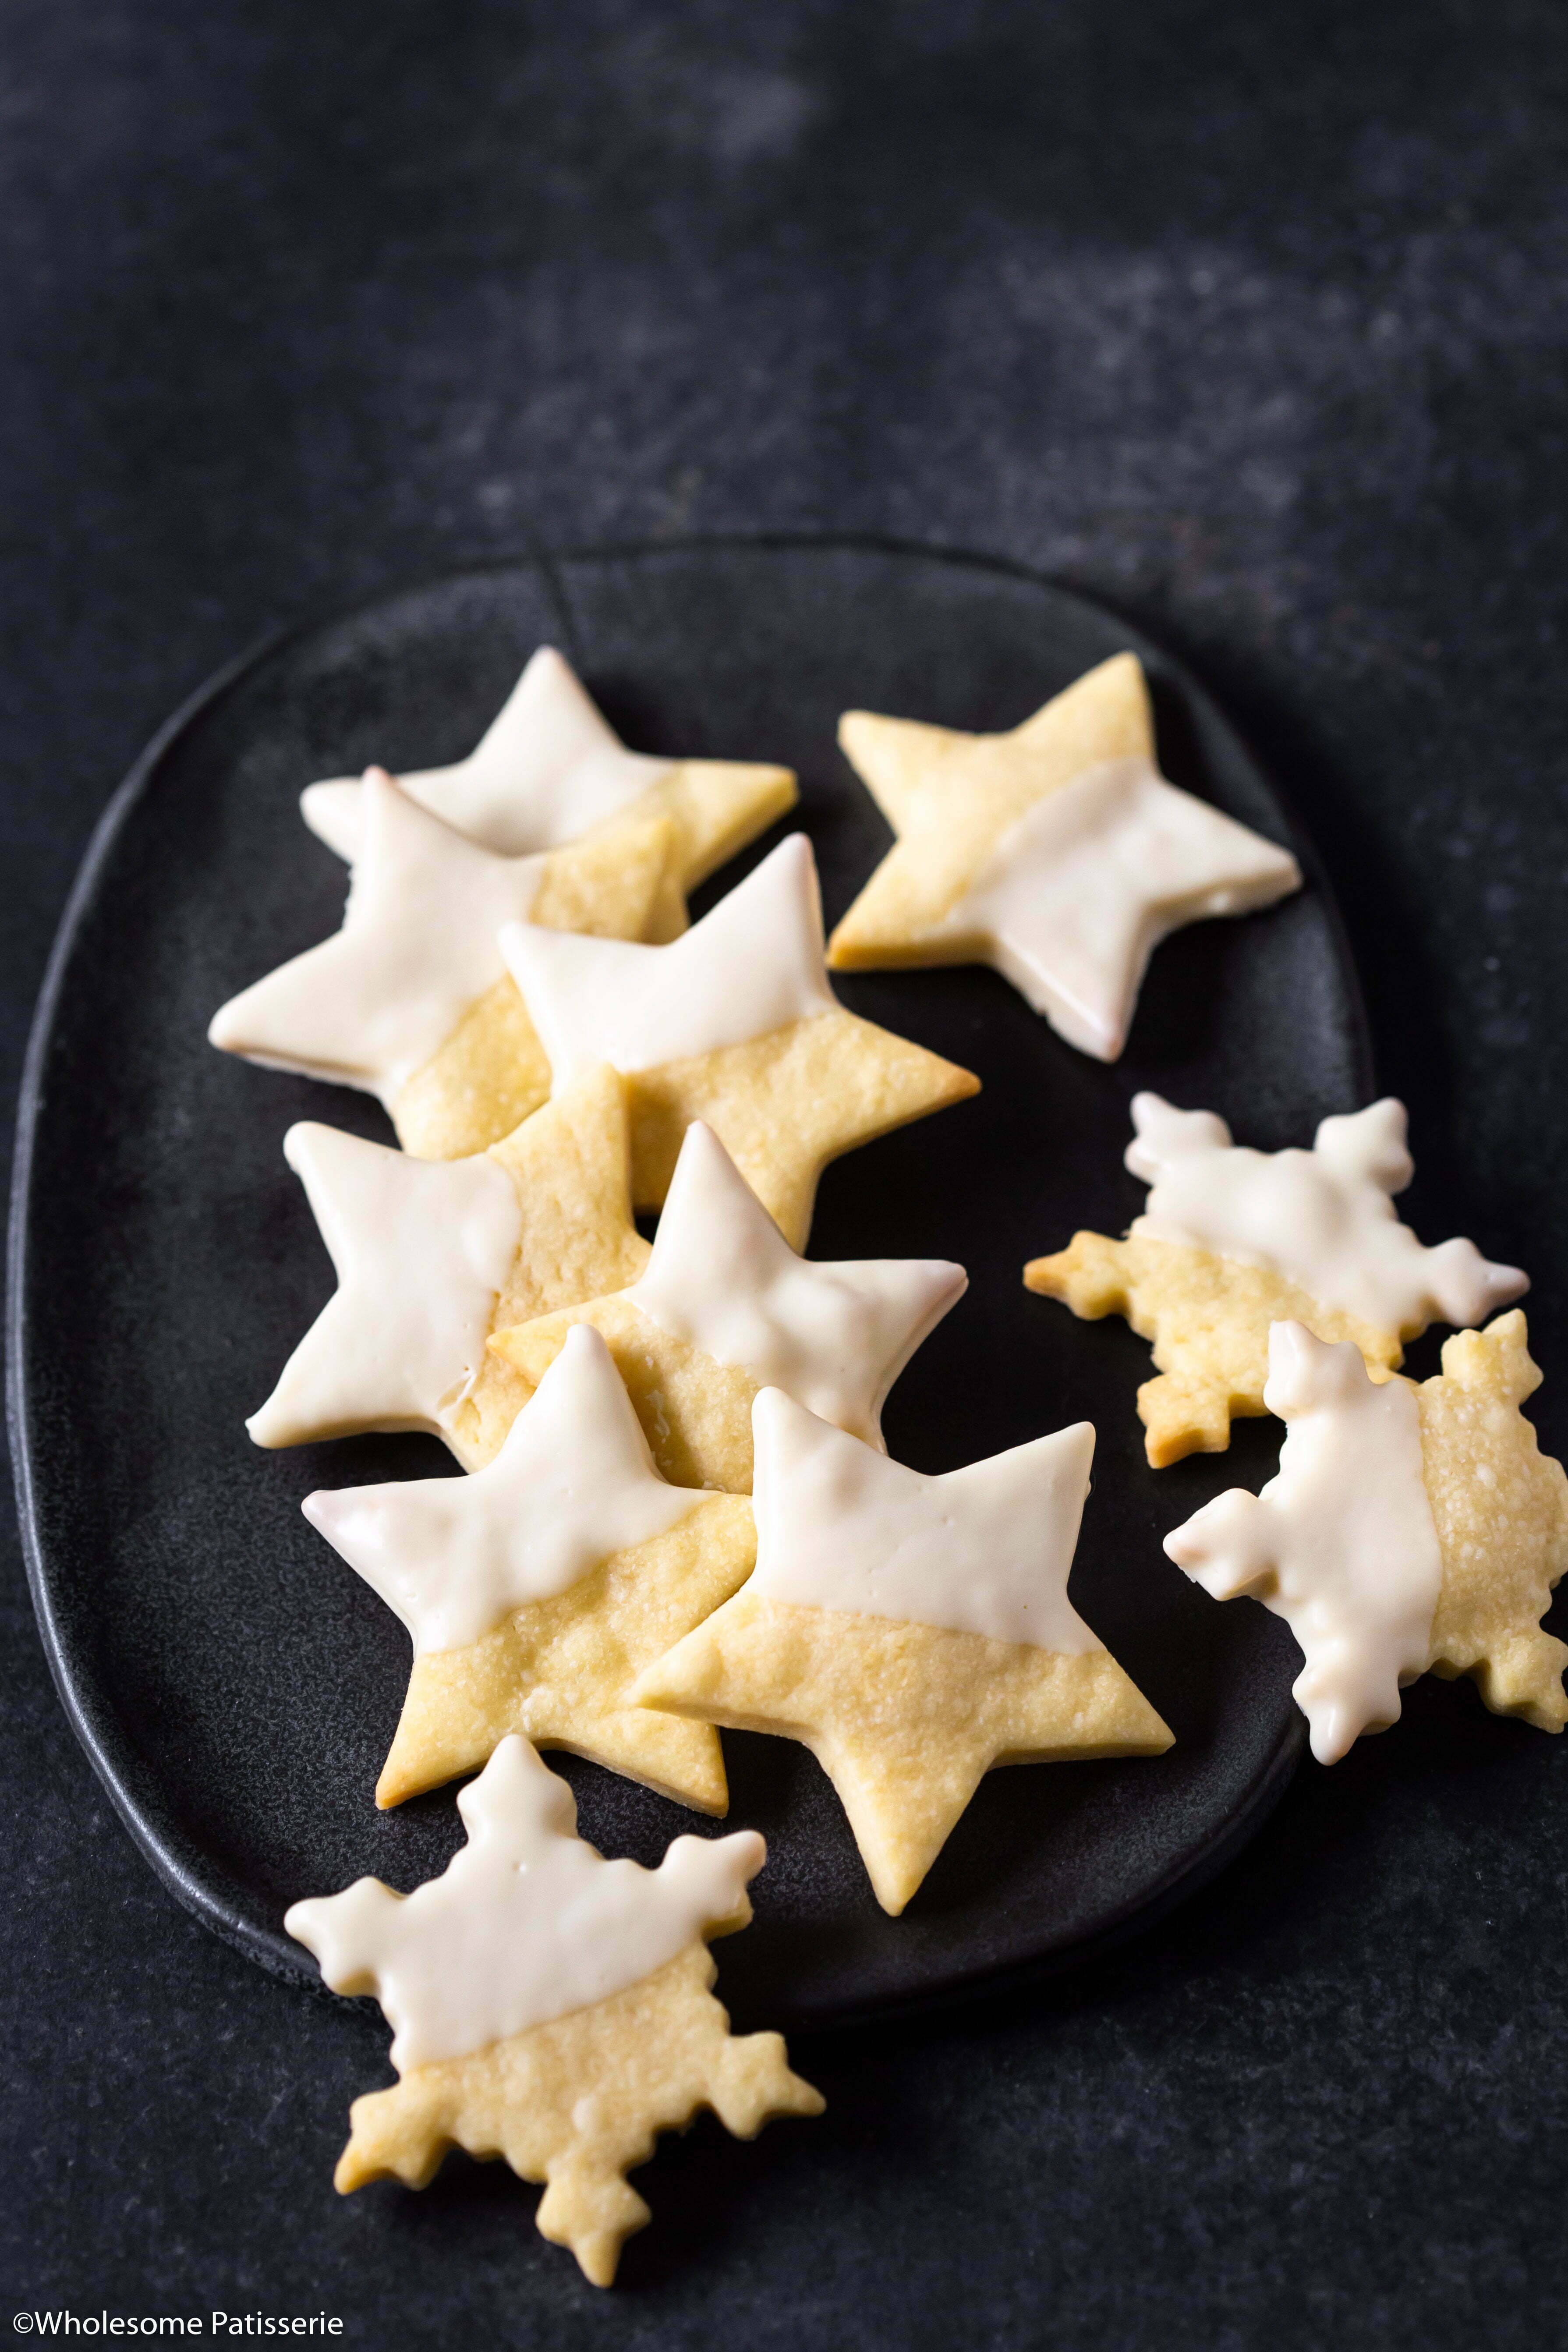 Classic Shortbread Cookies! The epitome of Christmas and the Holiday Season! These can be also be made gluten free! Dip in melted white chocolate for extra flair and sweetness!